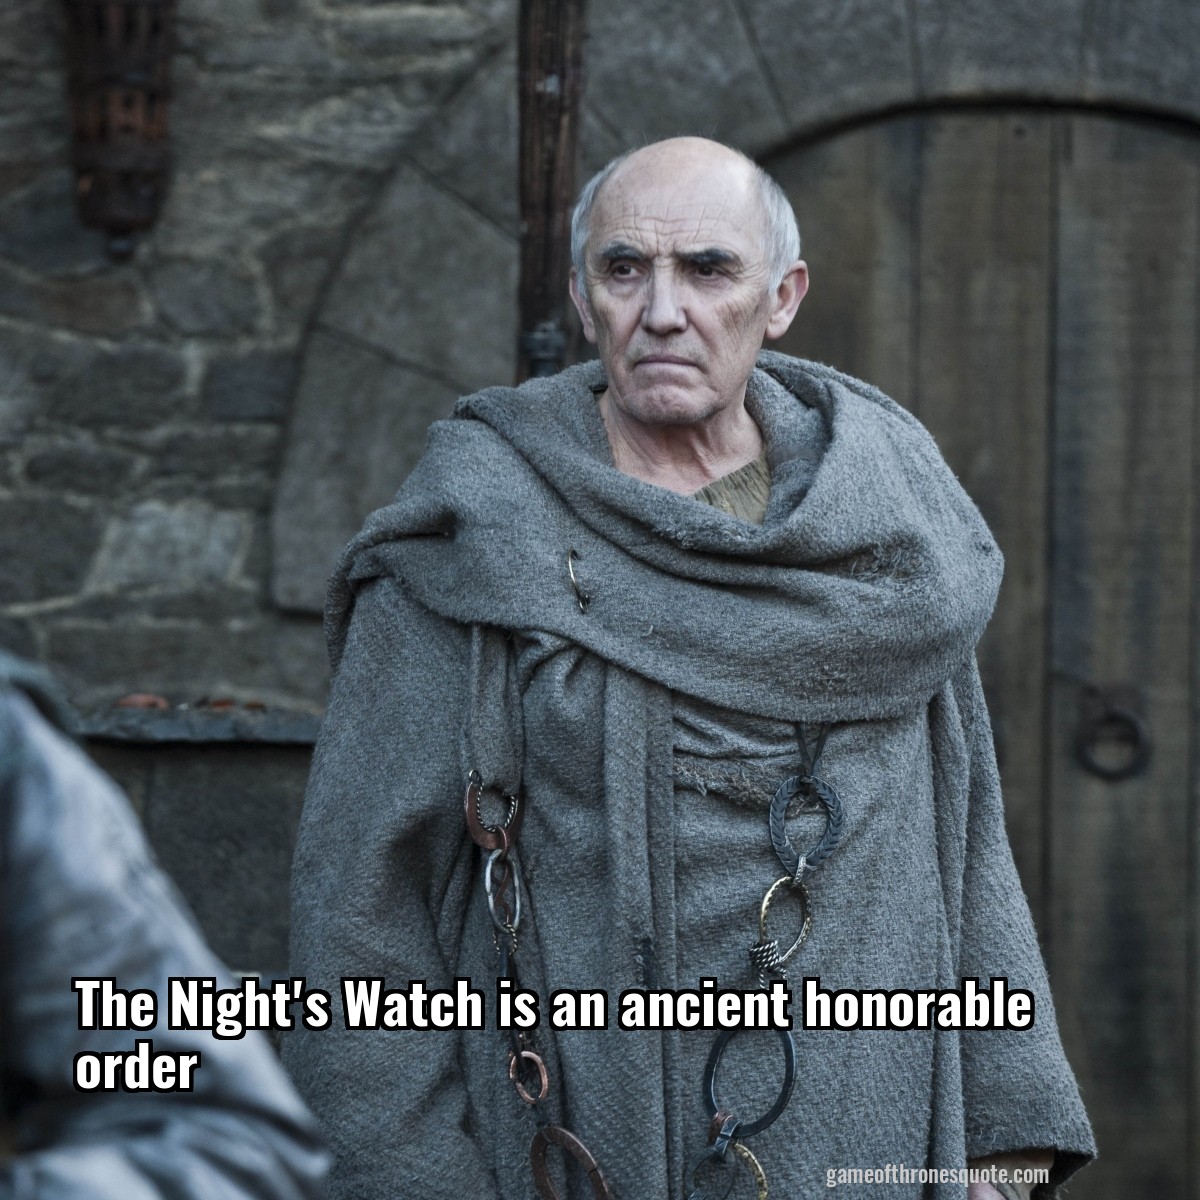 The Night's Watch is an ancient honorable order